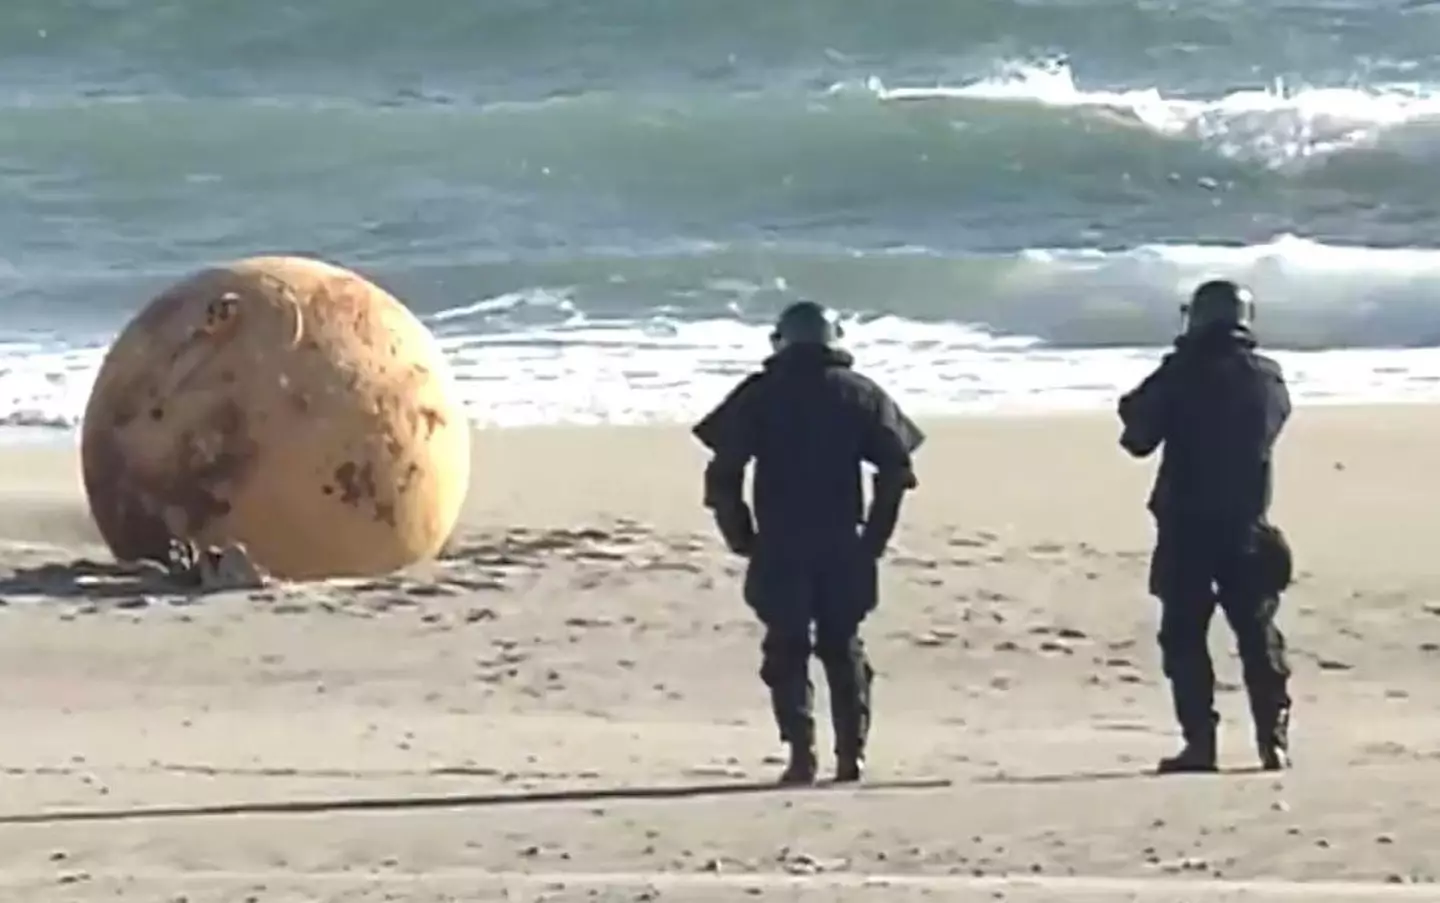 People are fascinated over what this big ball on the beach could be.